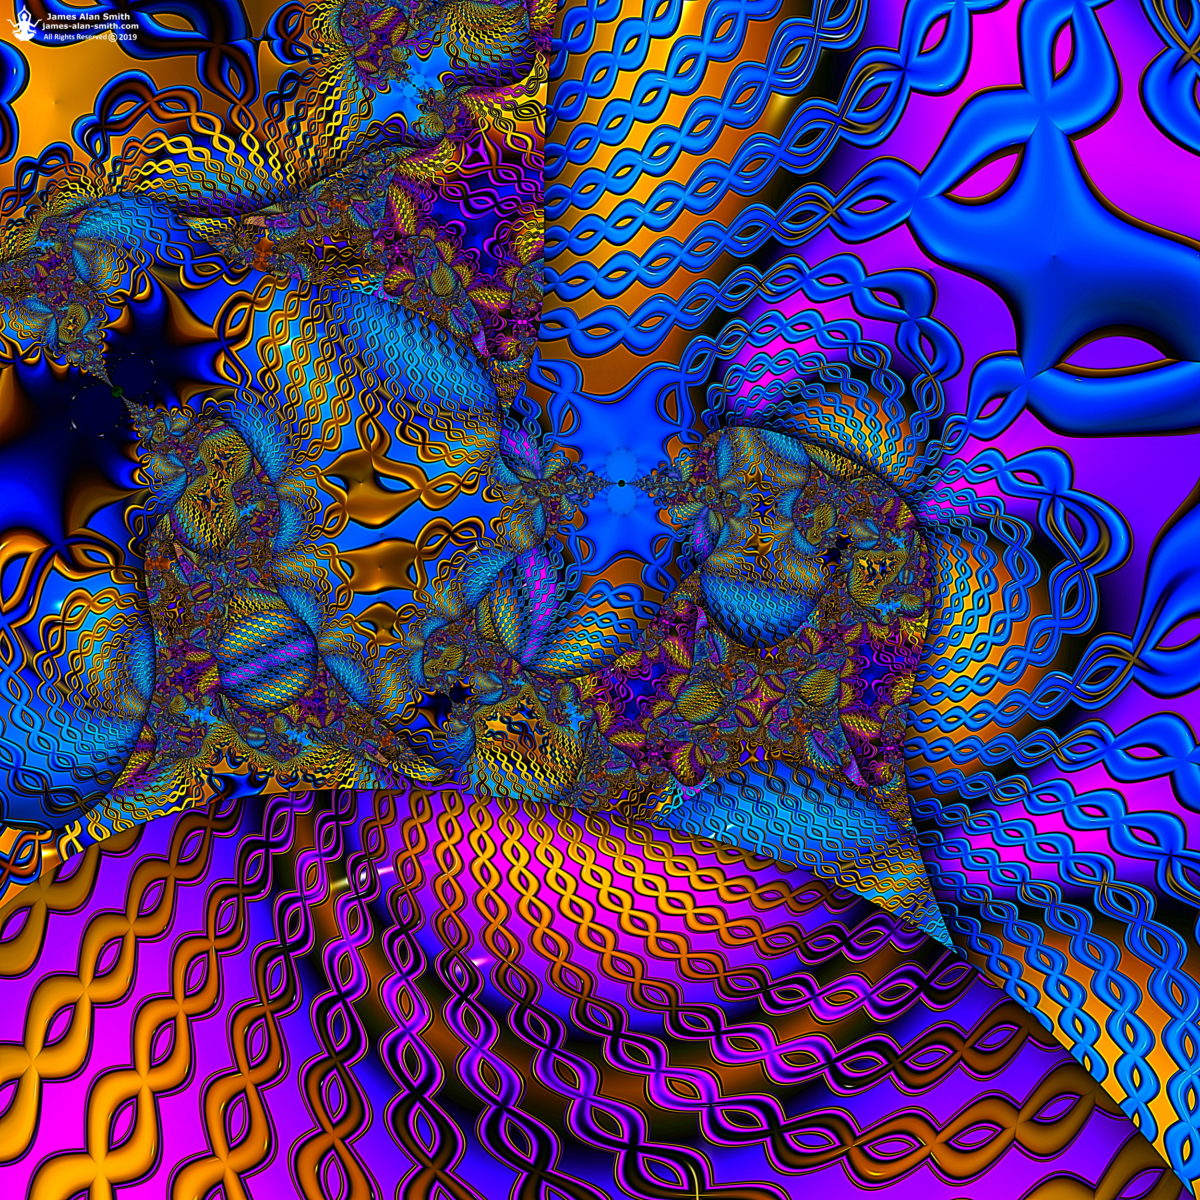 Dreams from Fractal Space: Artwork by James Alan Smith